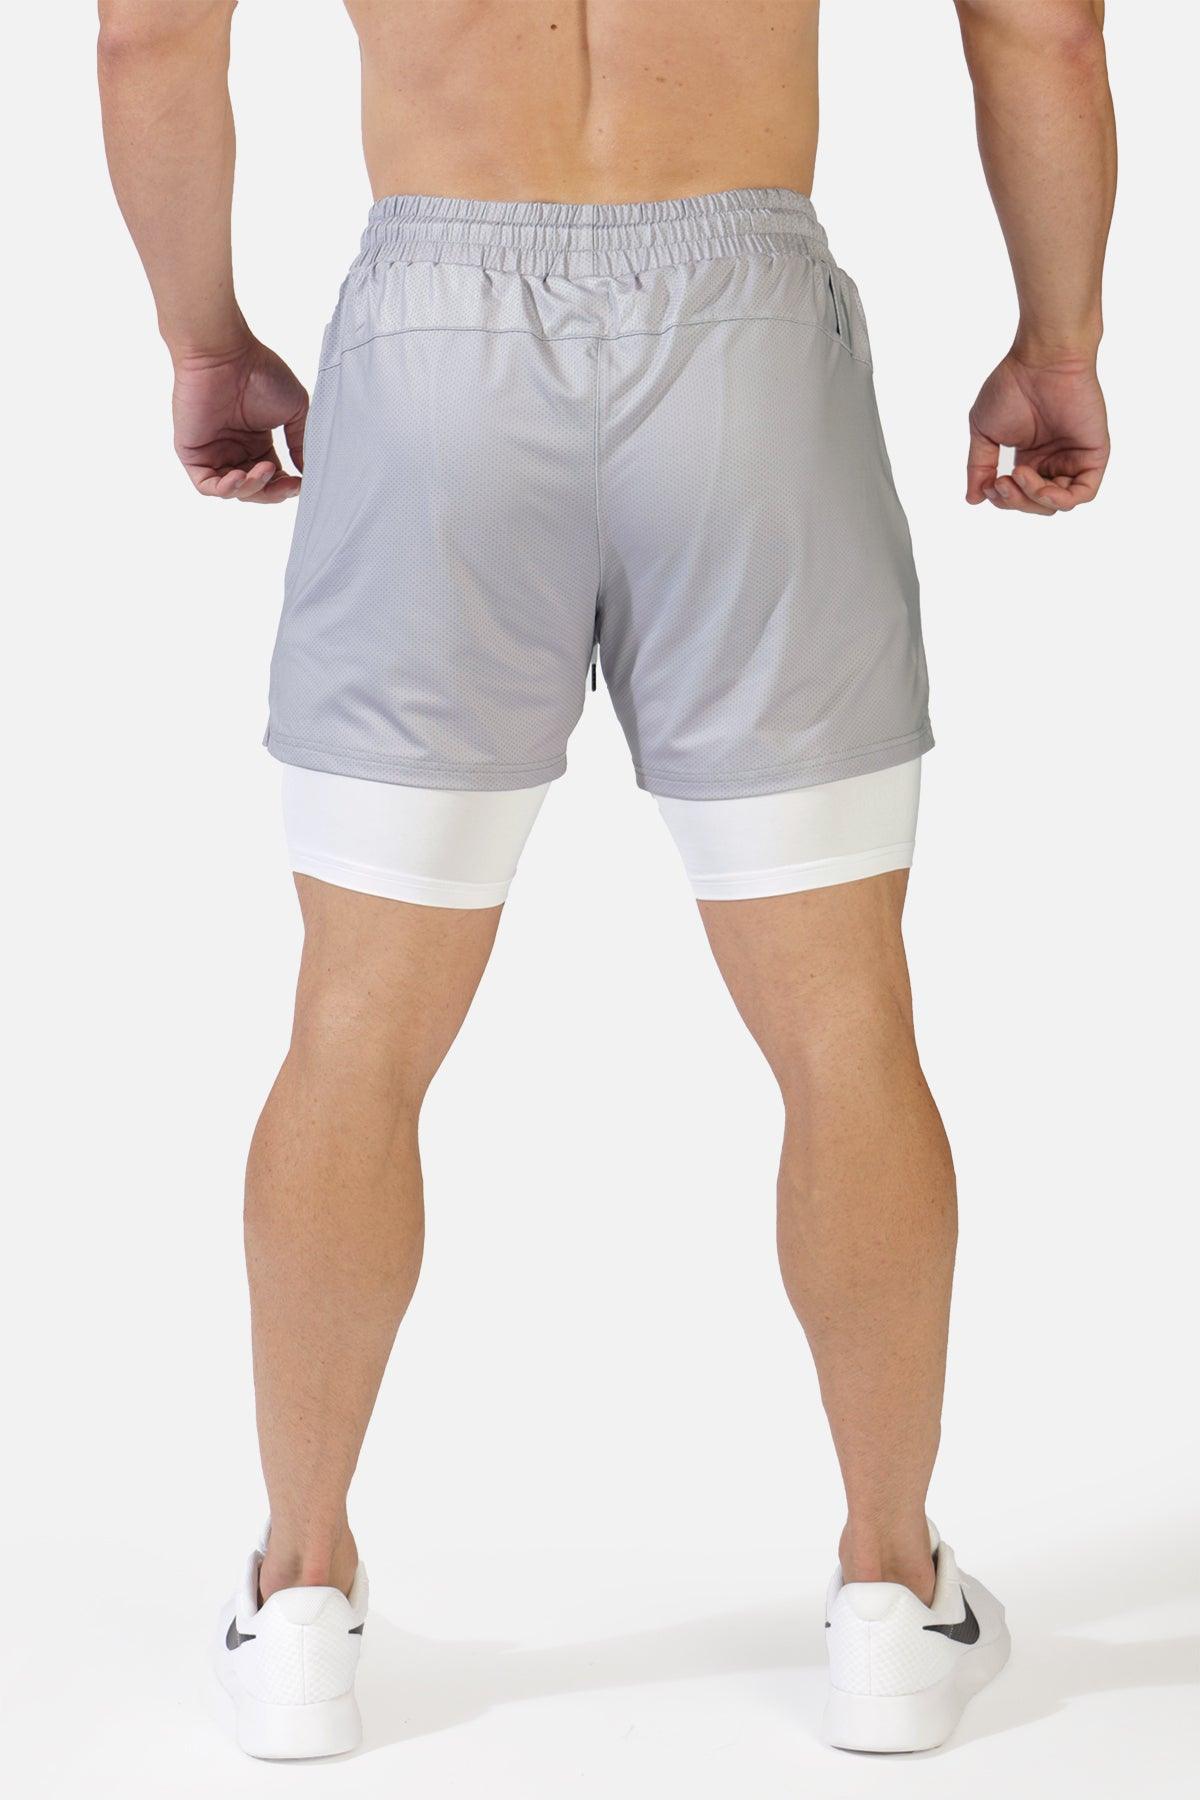 Pro 2 In 1 Athletic Shorts - Silver - Jed North